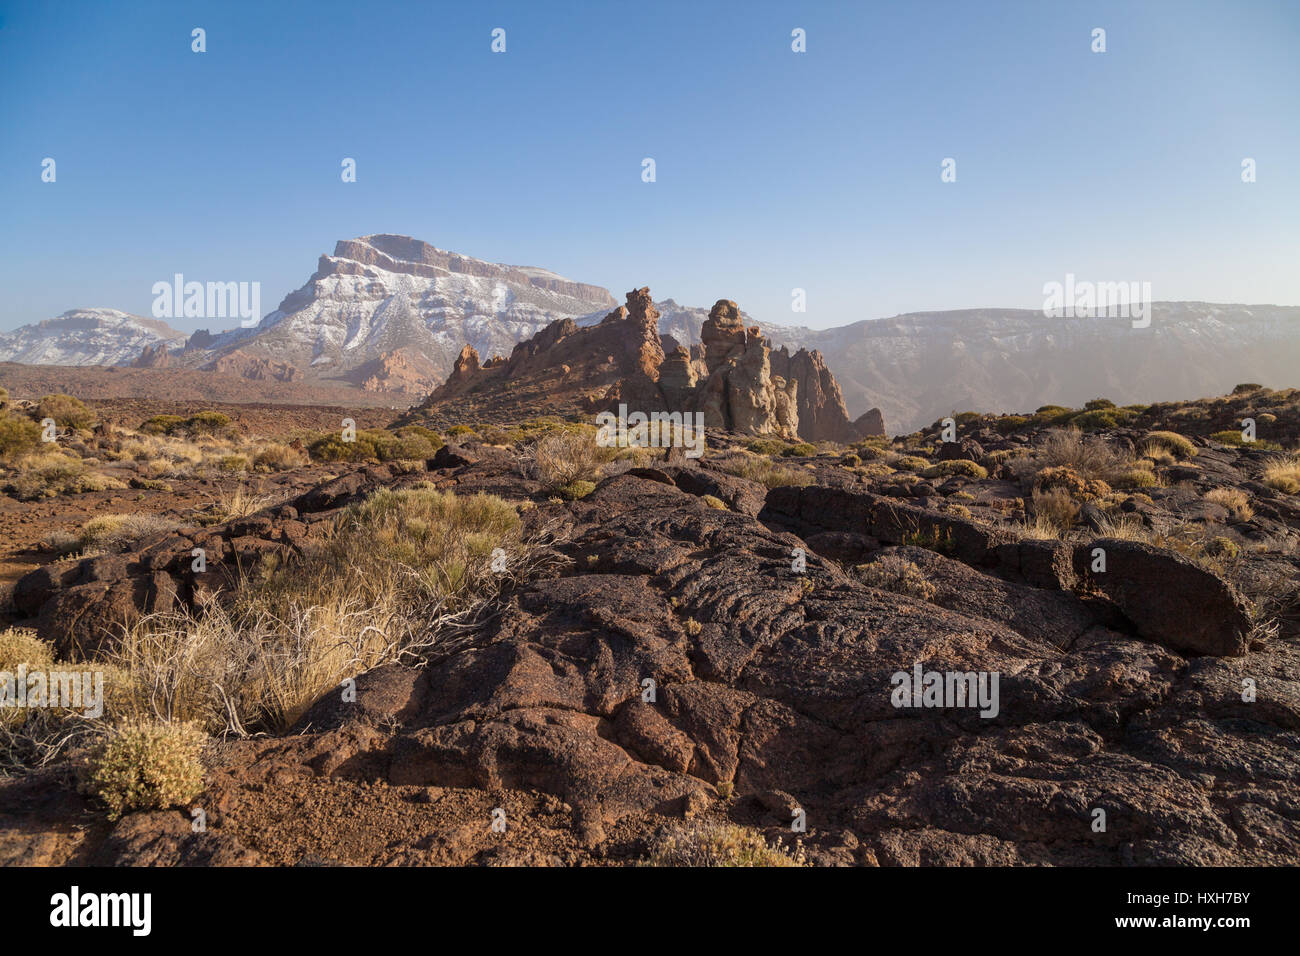 Looking towards Mount Guajara from the middle of the crater, Teide National Park, Tenerife Island Stock Photo